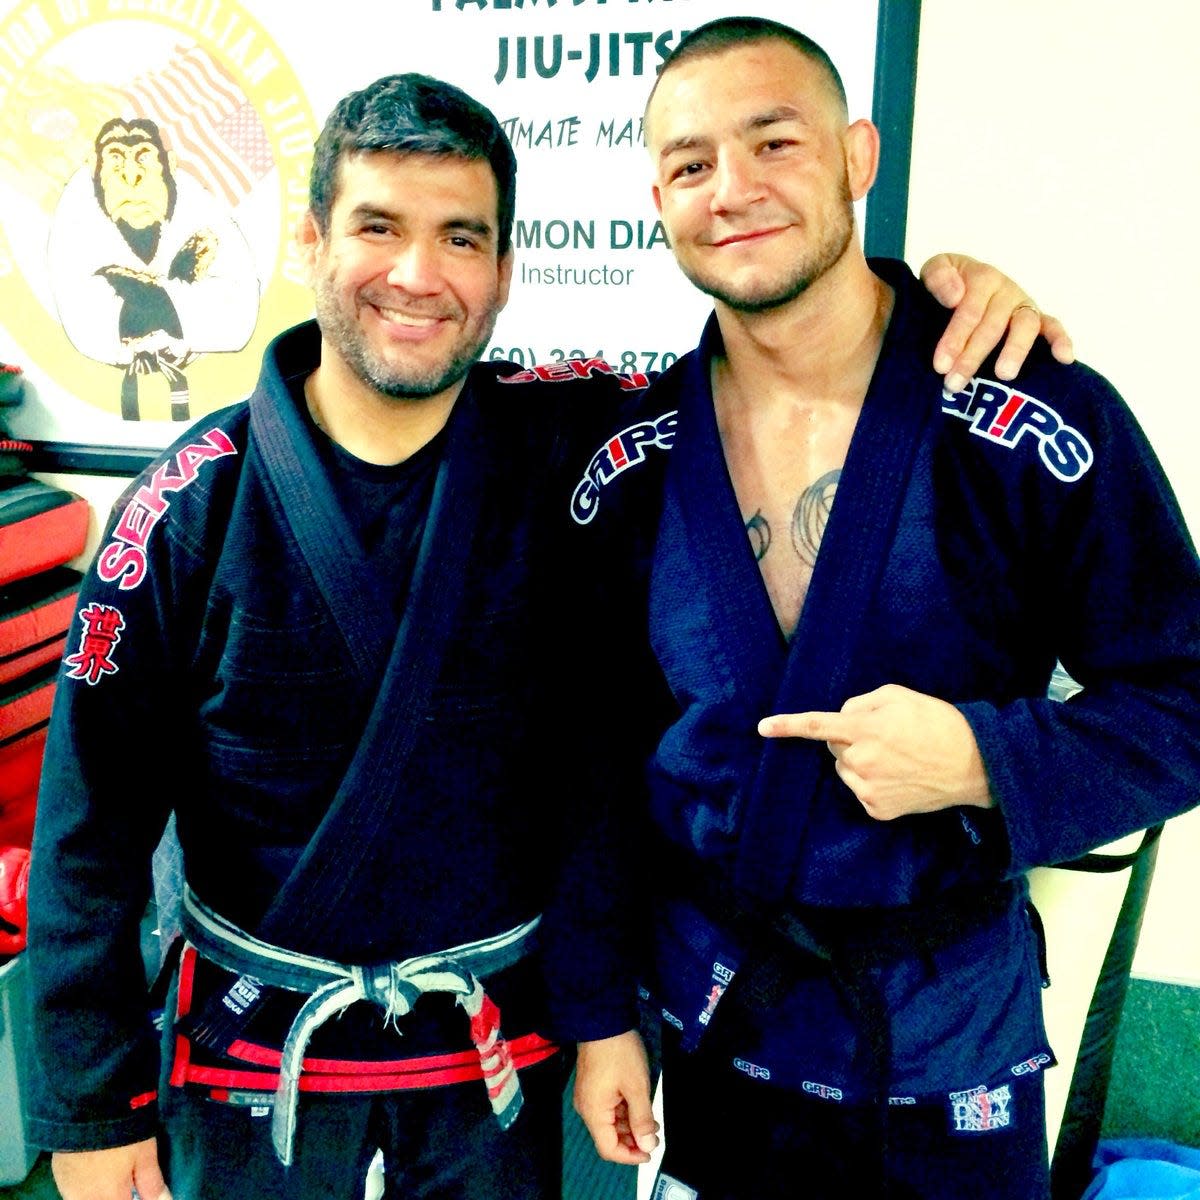 In this undated photo, Ramon Diaz, left, stands with UFC fighter Cub Swanson.